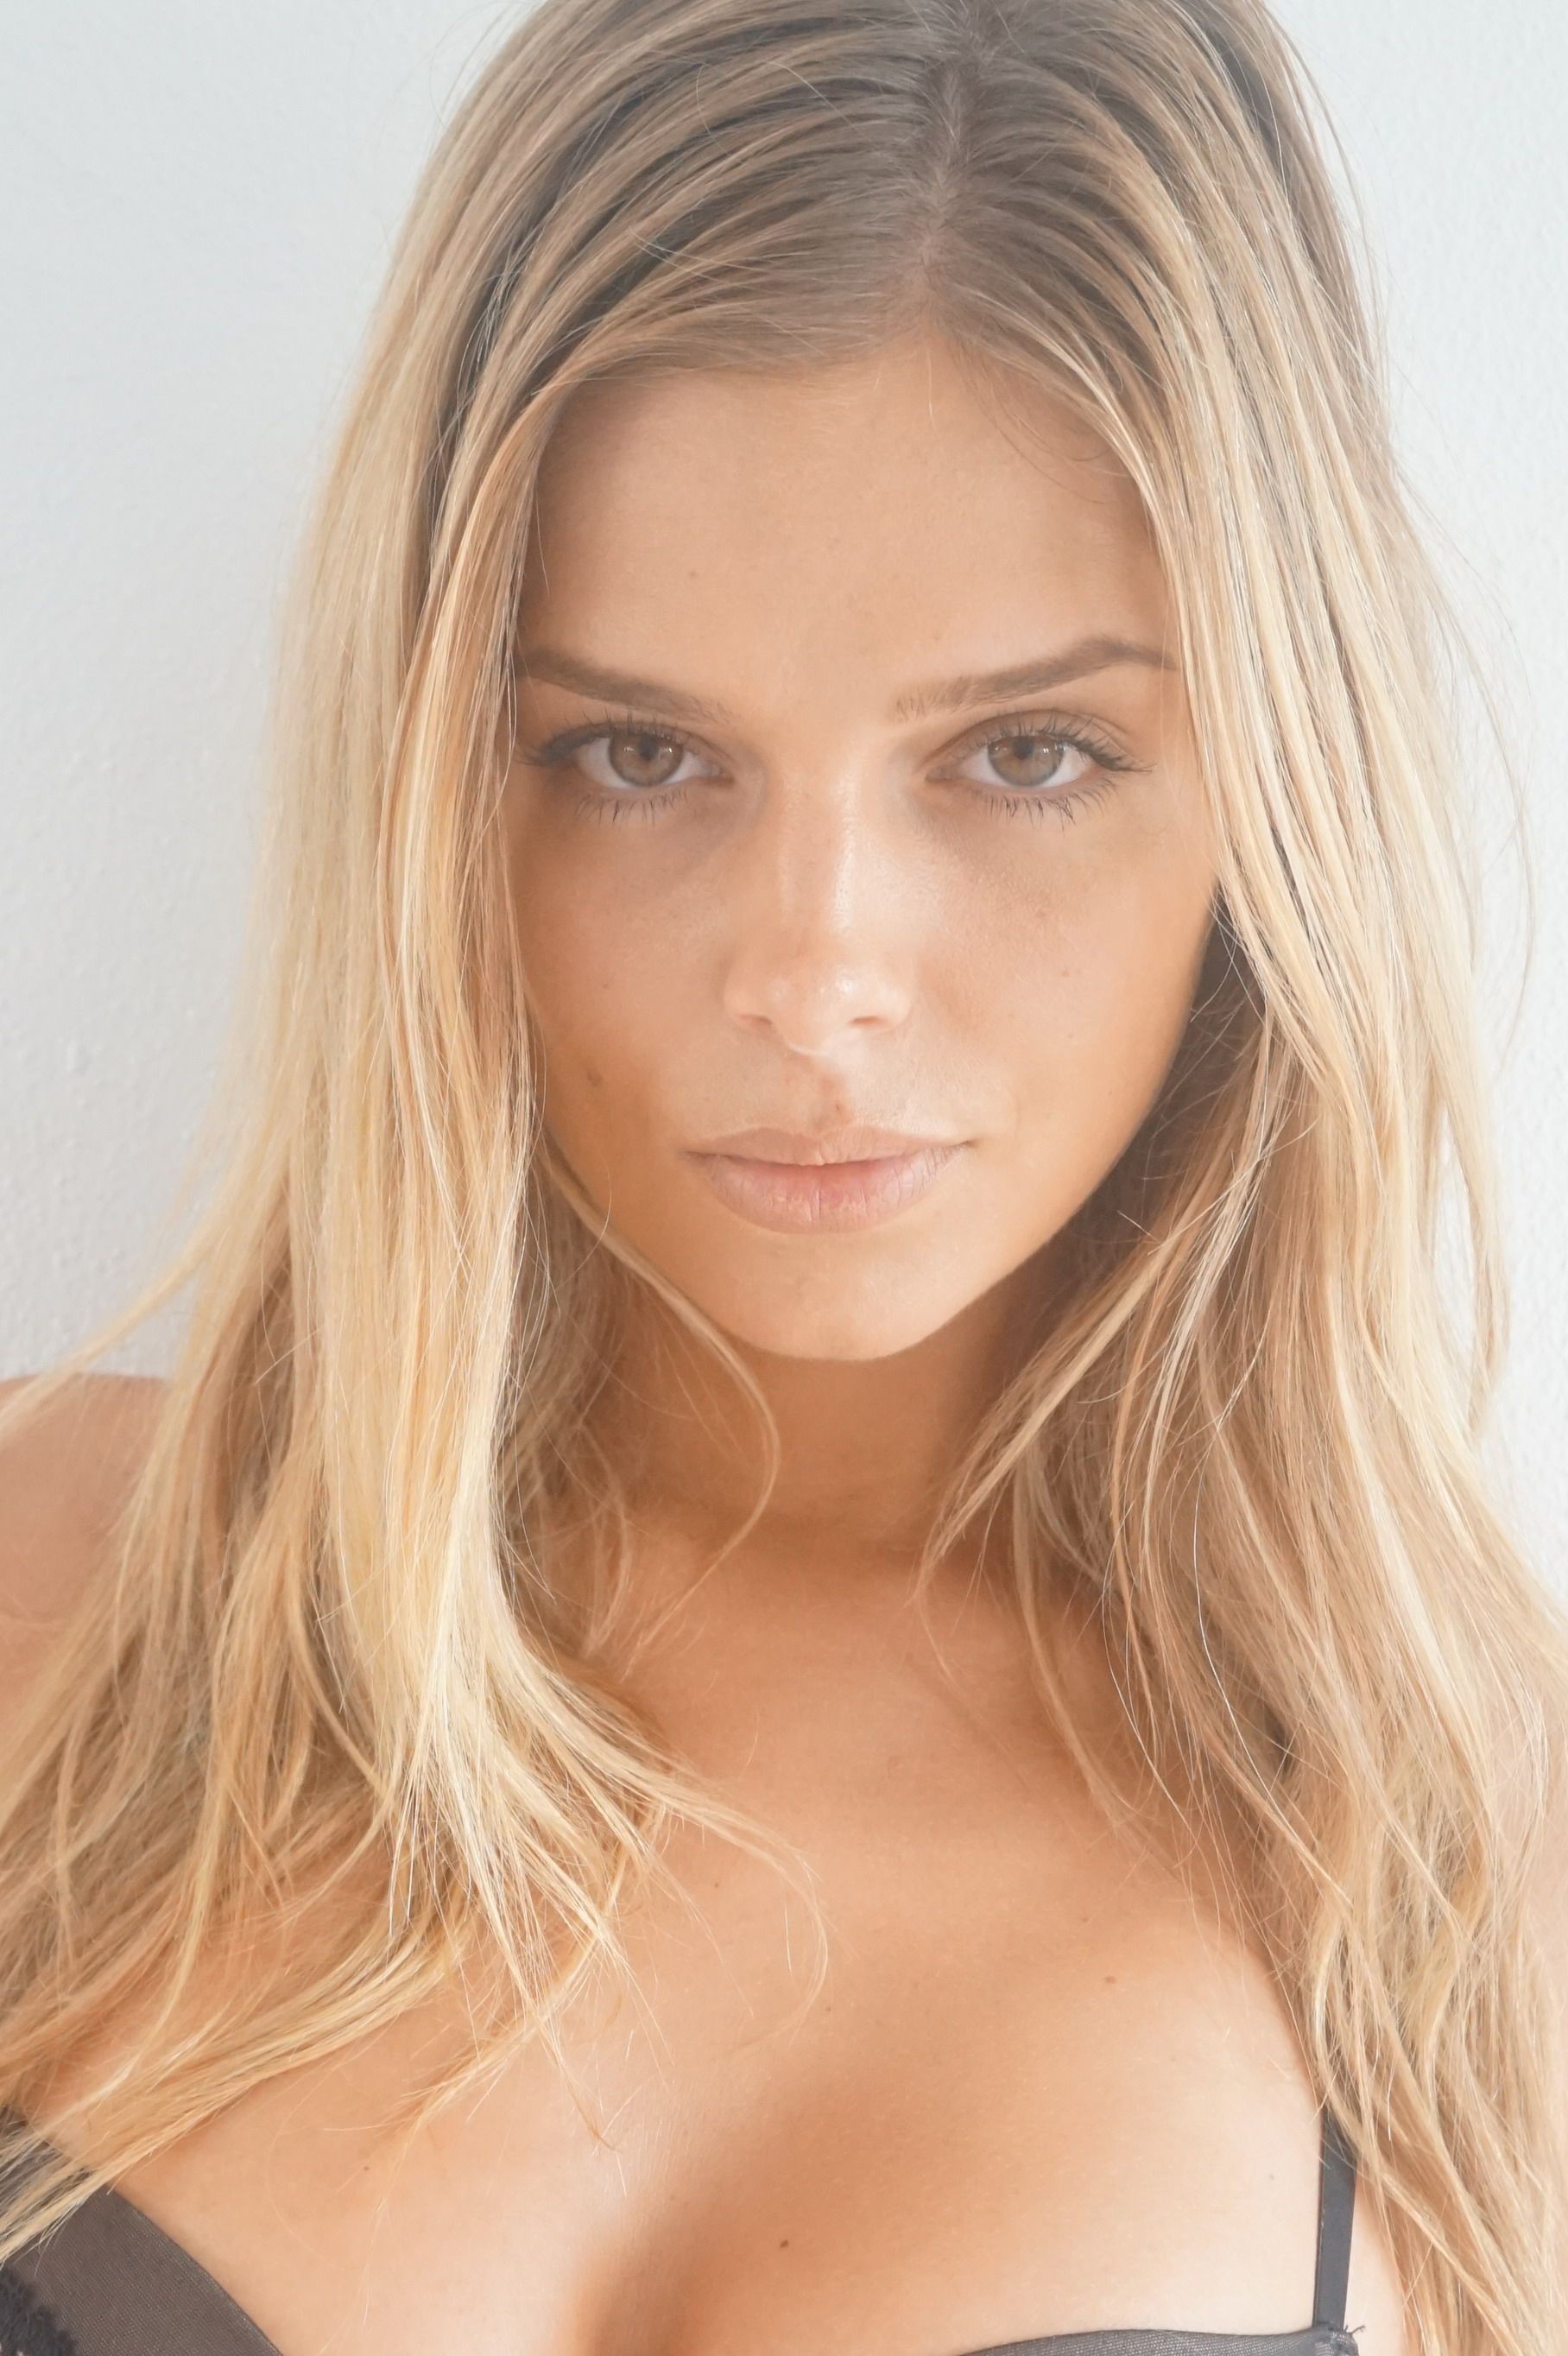 1677774825 913 Danielle Knudson Nude TheFappening 252 - Danielle Knudson Nude Leaked (Over 200 Photos!)